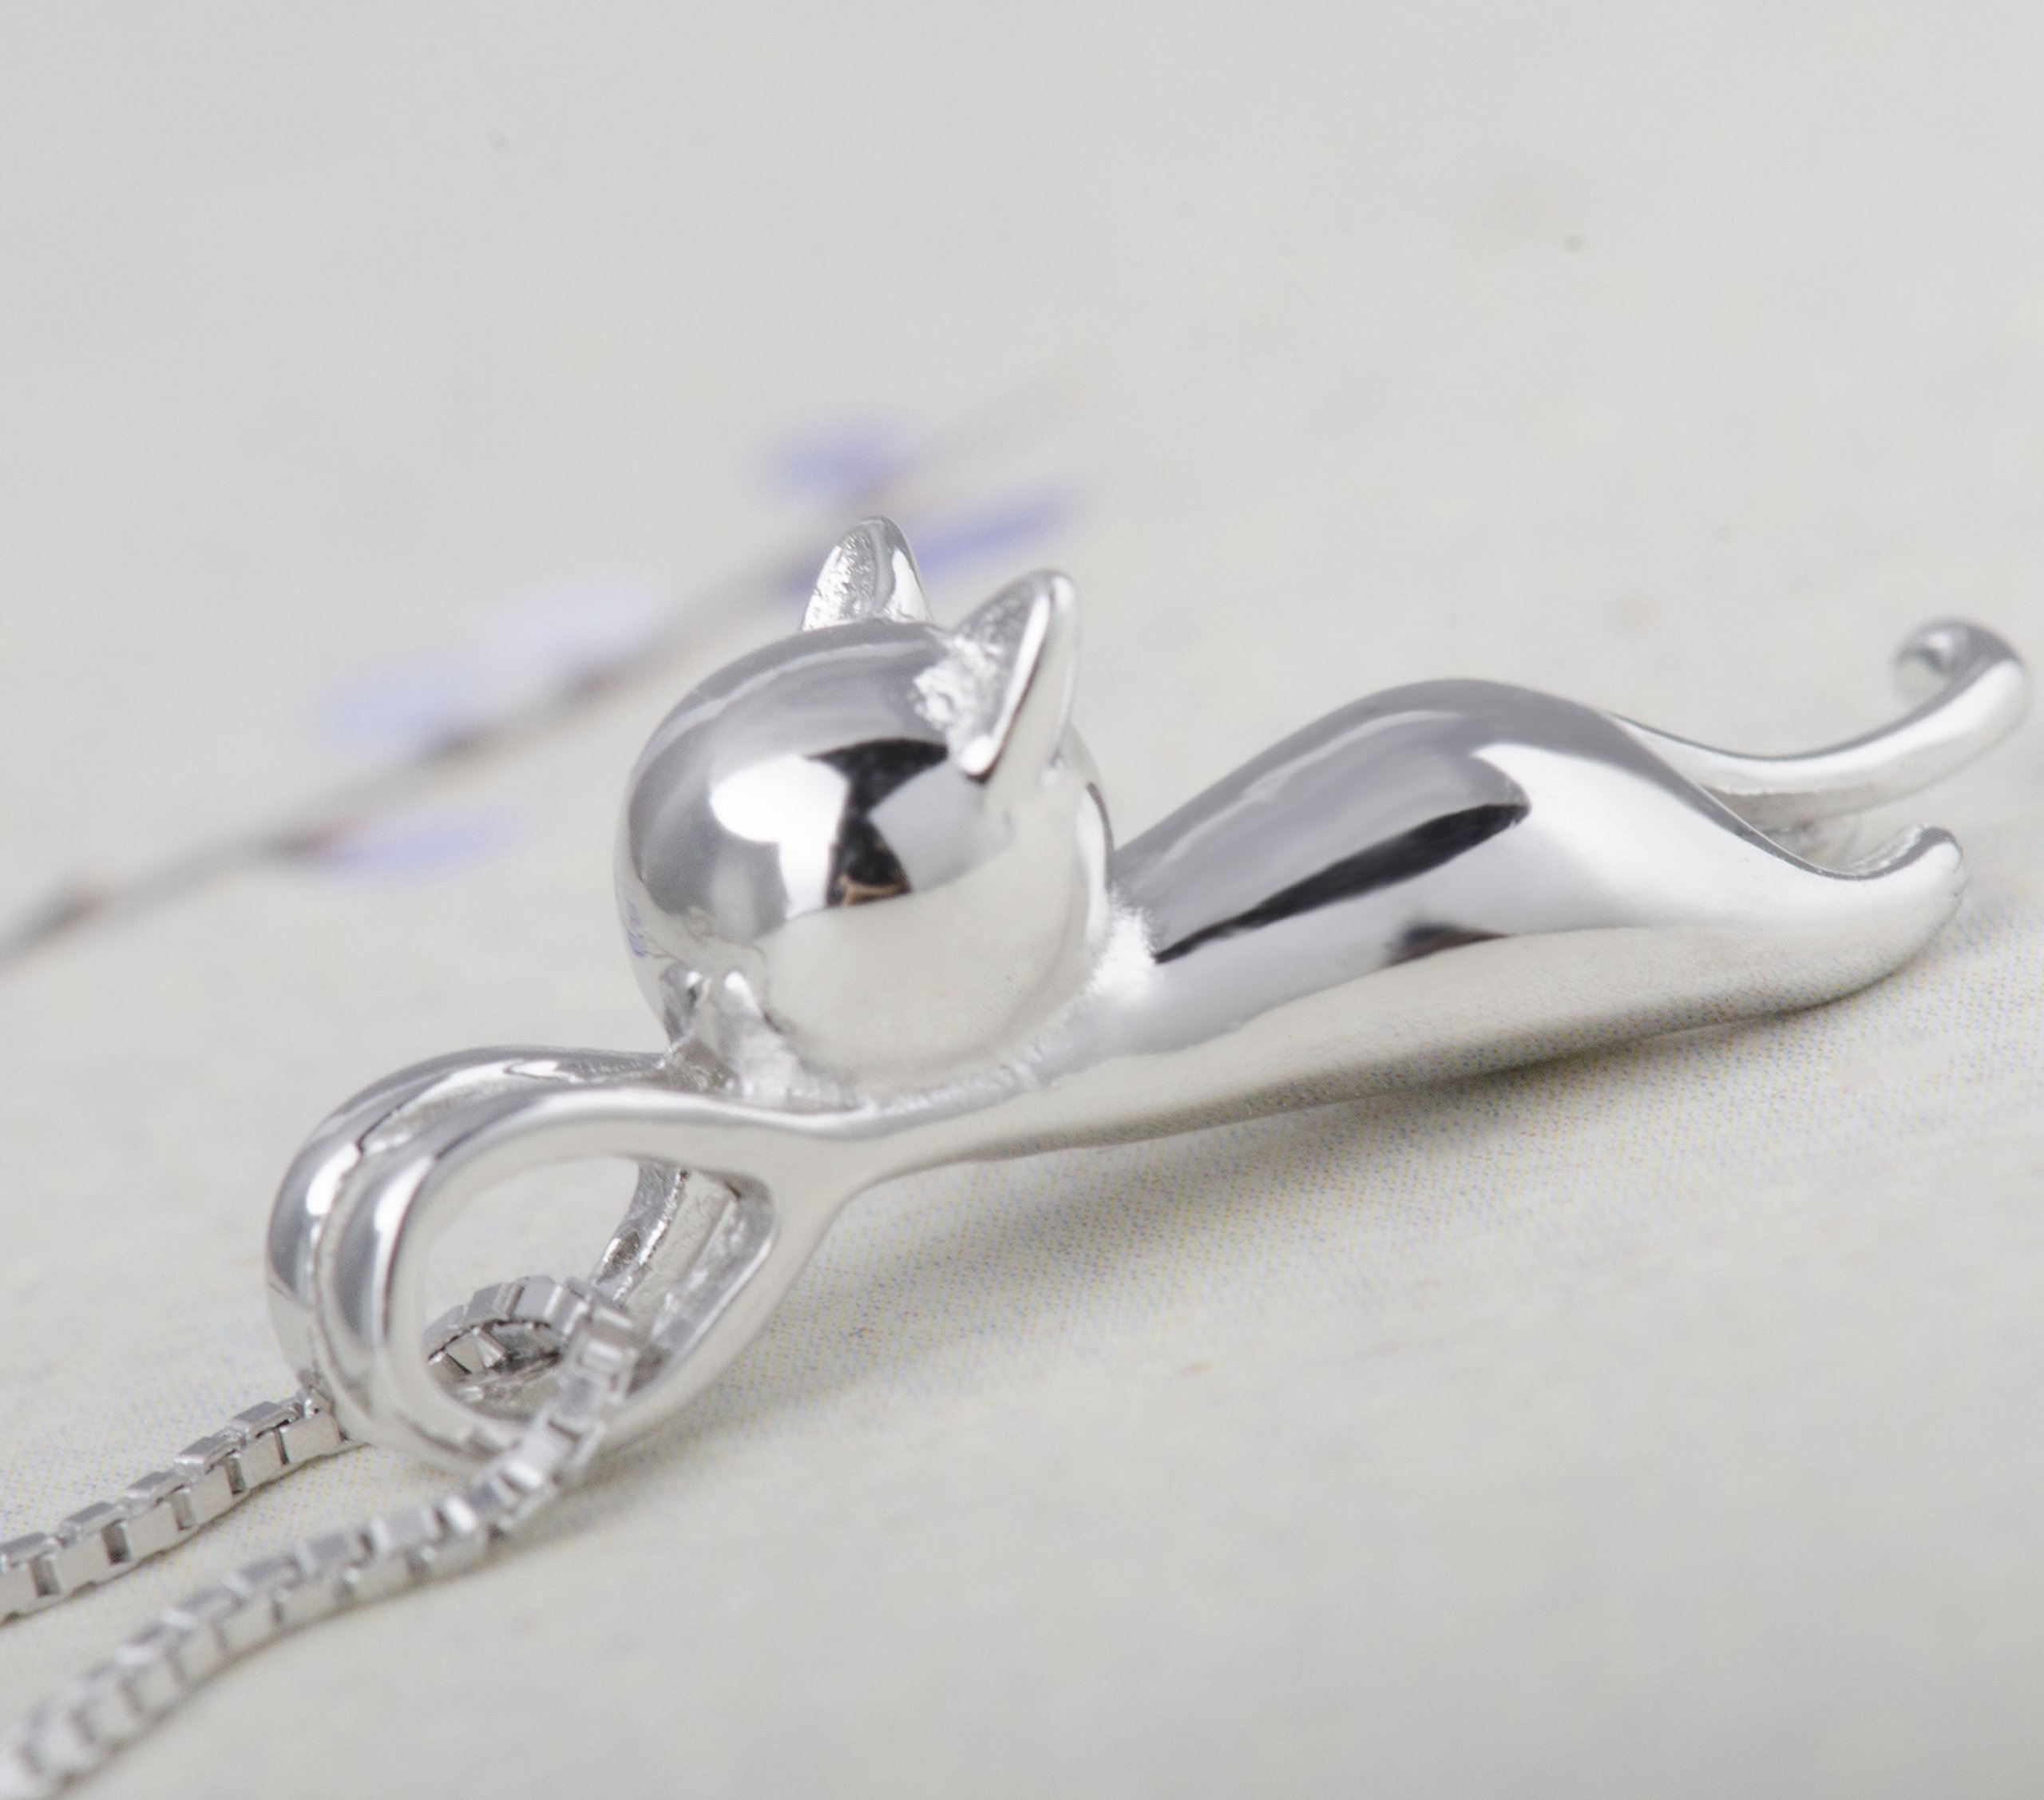 S.Leaf S925 Sterling Silver Cat Necklaces Cat Jewelry for Women Cat Gifts for Cat Lovers Cat Lover Gifts for Women Cat Lady Gifts Silver Cat Pendant Collarbone Necklace